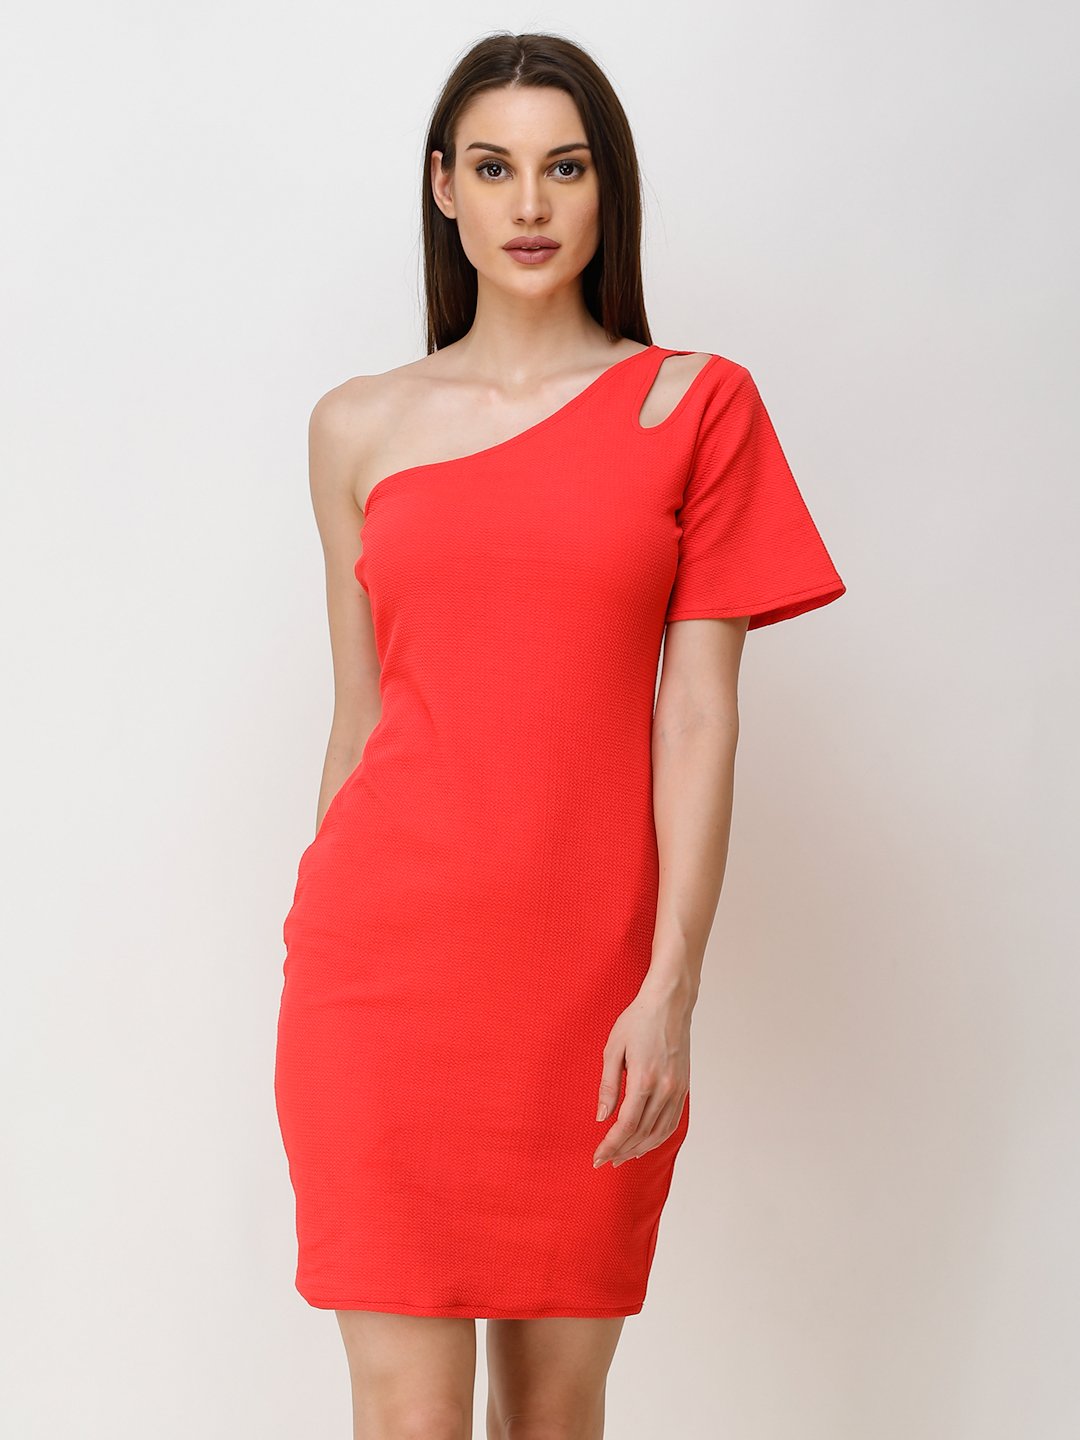 SCORPIUS RED ONE SHOULDER BODYCON DRESS